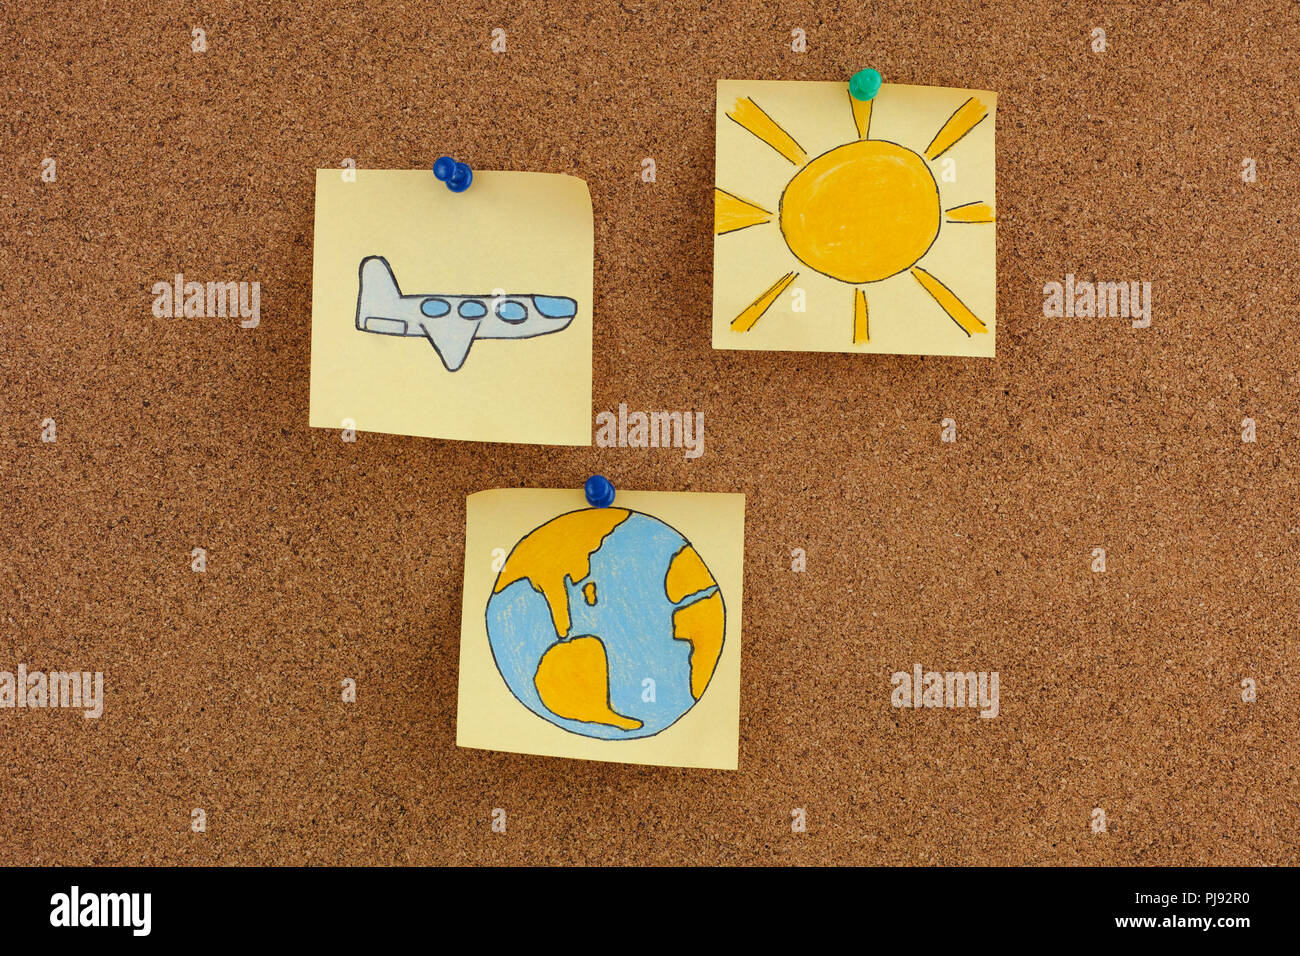 Airplane flying around the Earth. Post it notes with plane, planet Earth and Sun. Travel or vacation concept. Stock Photo